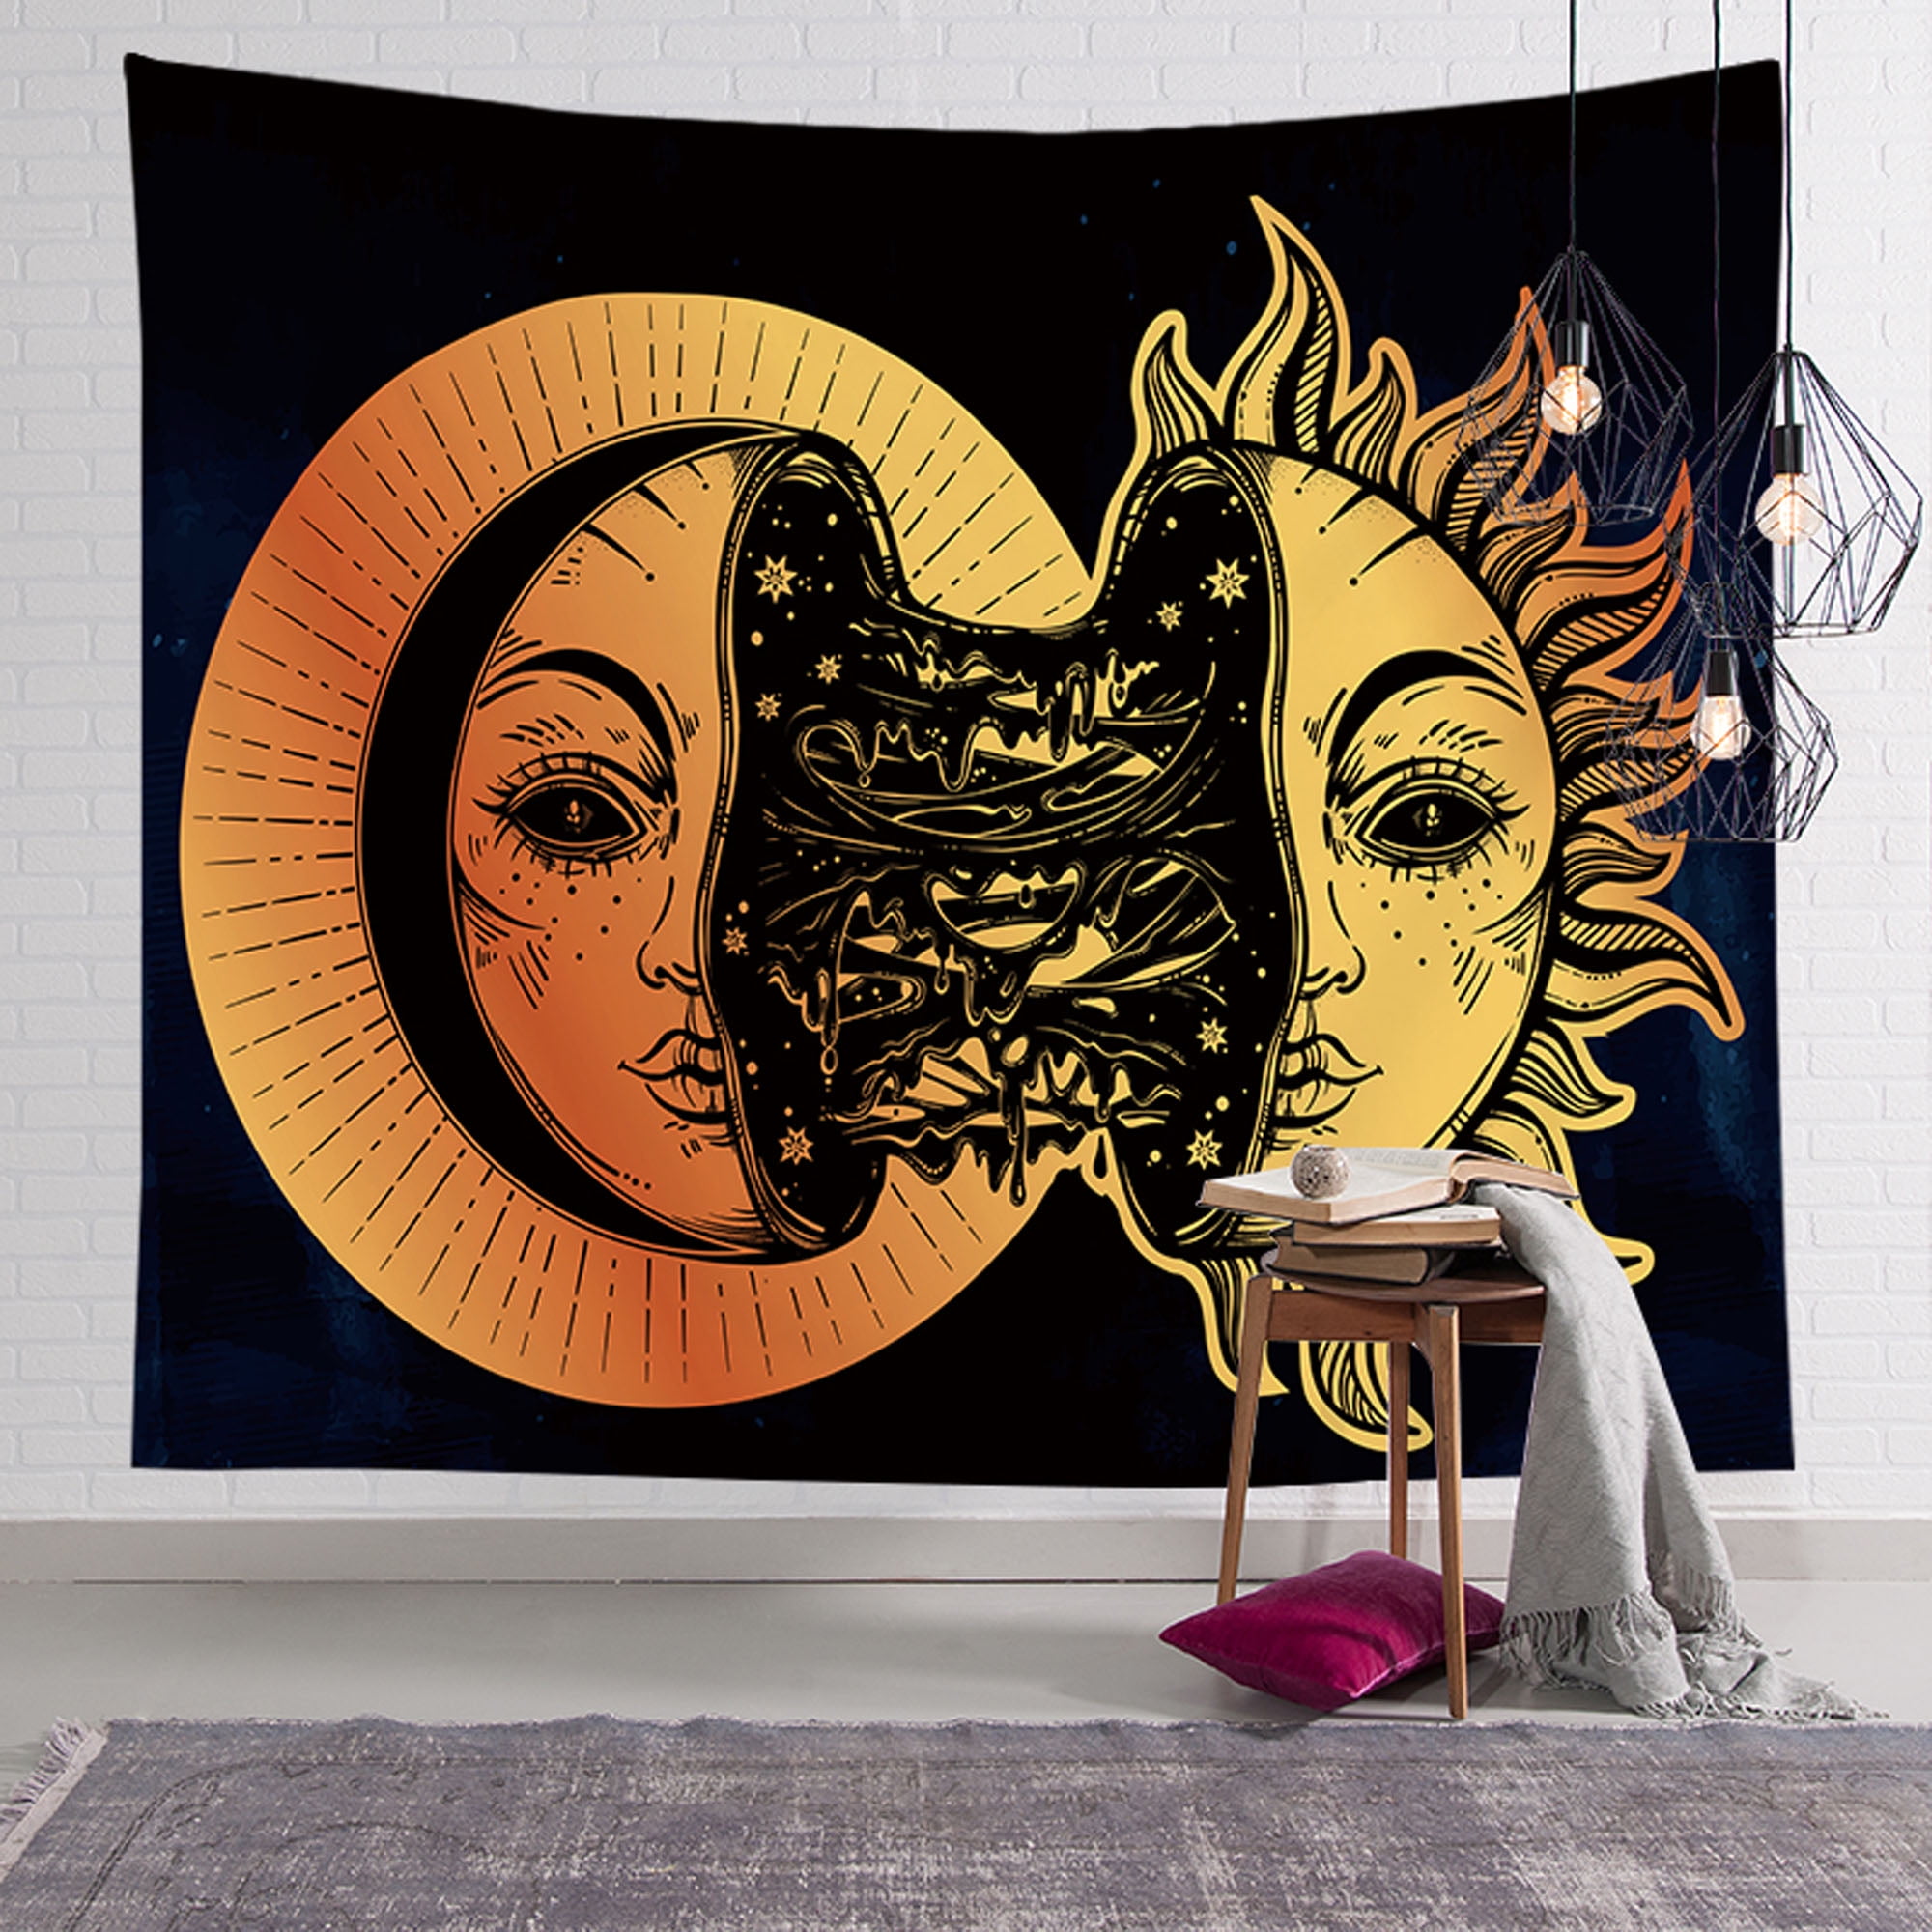 Sun Moon Colorful Mandala Tapestry Psychedelic Wall Hanging Tapestry Home Decor 